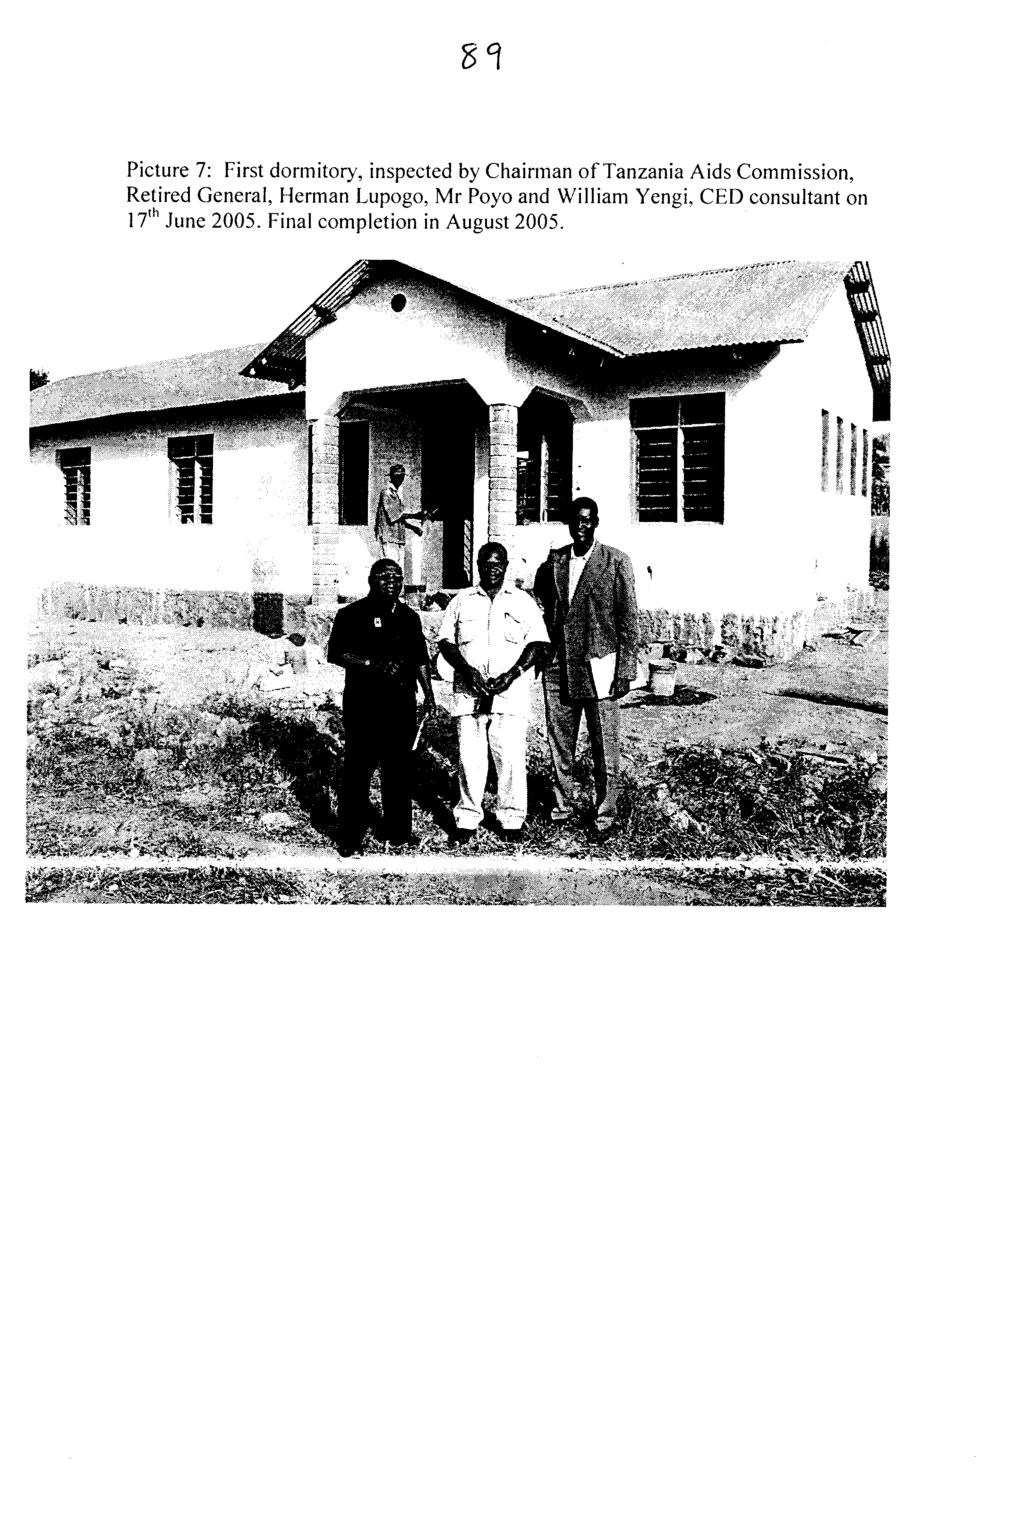 Picture 7 : Firs t dormitory, inspecte d b y Chairman of Tanzania Aids Commission, Retired General,